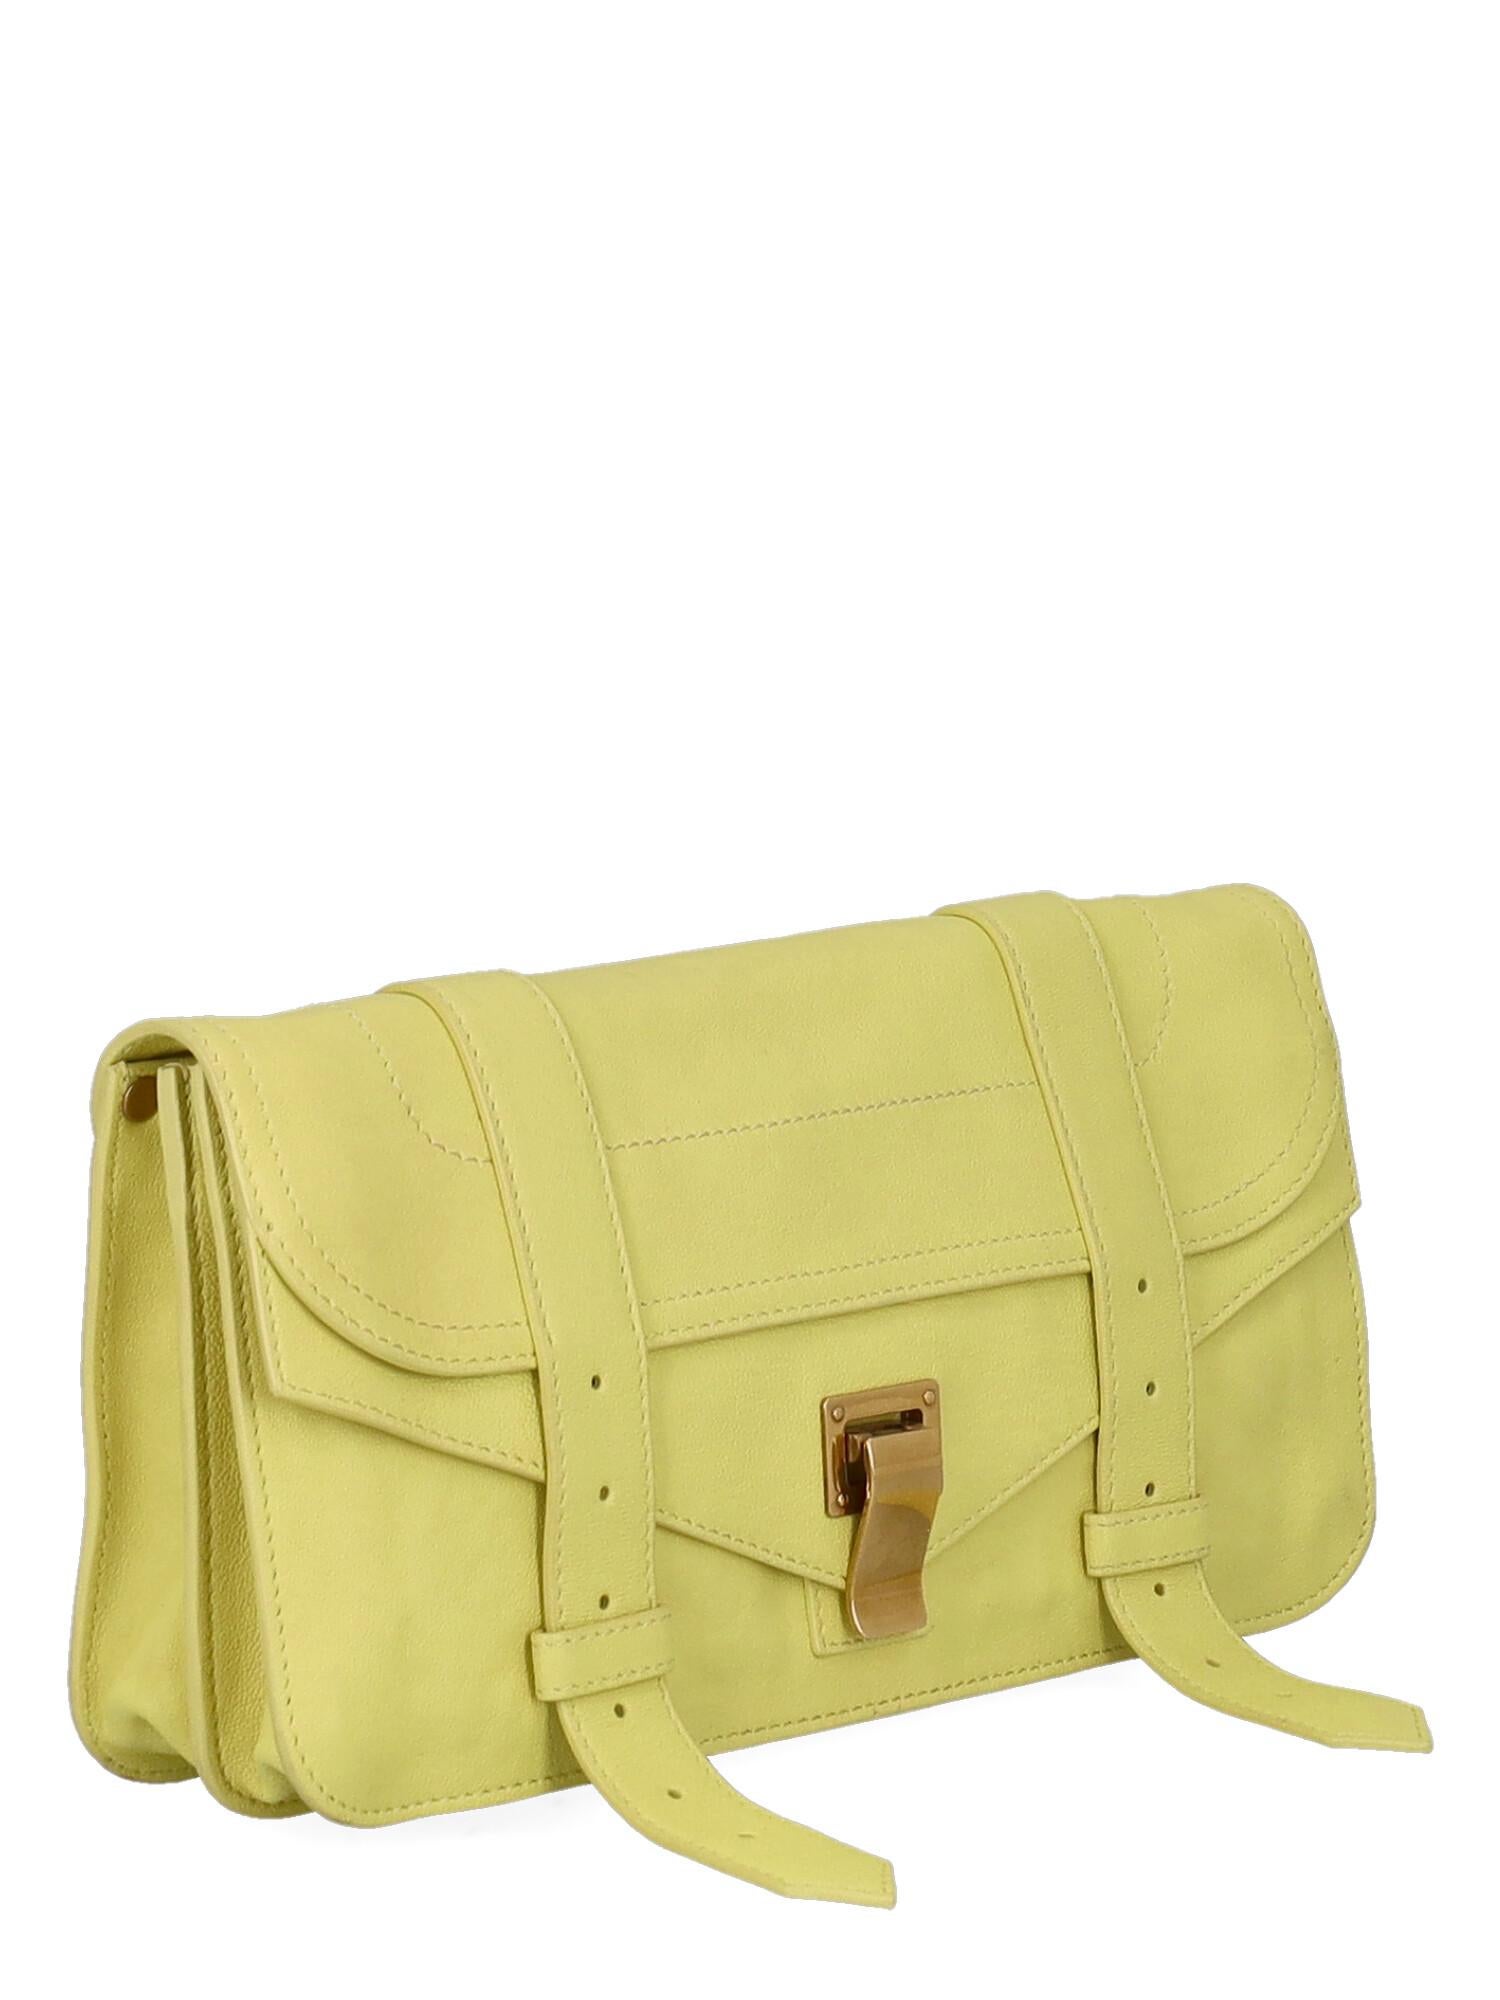 Proenza Schouler Women Handbags Ps1 Yellow Leather  In Good Condition For Sale In Milan, IT